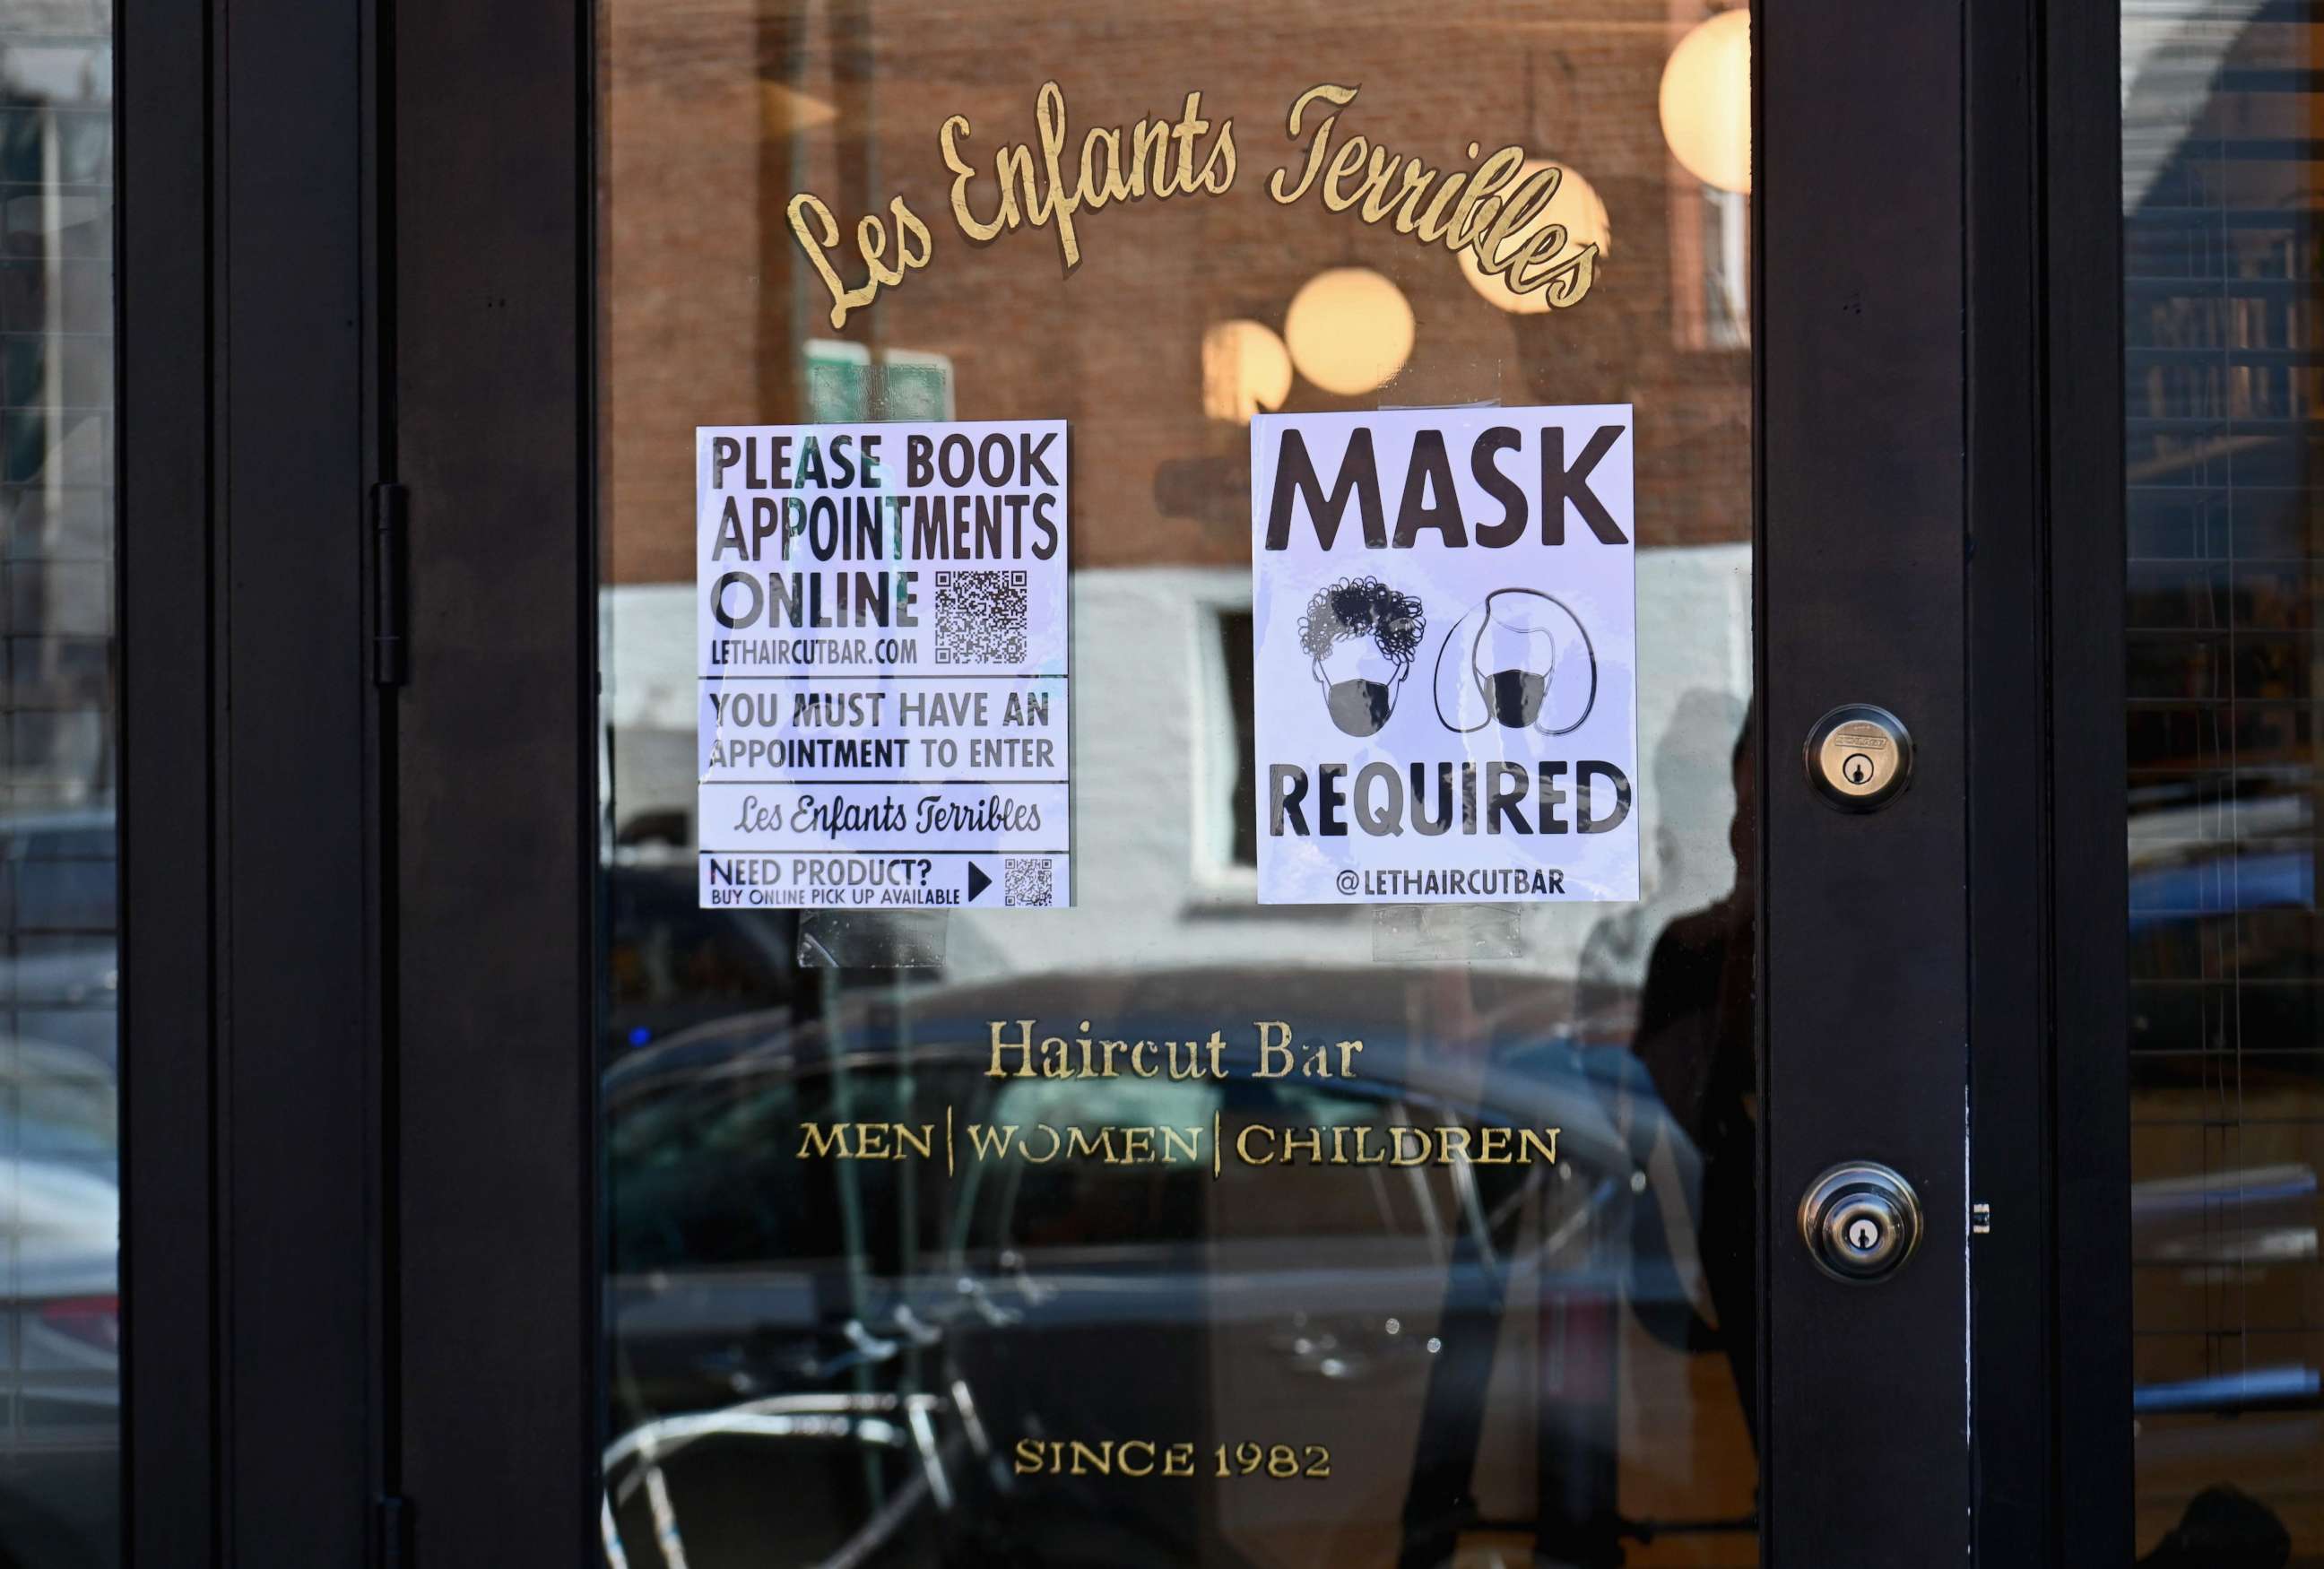 PHOTO: A "Mask Required" sign is seen outside 'Les Enfants Terribles' hair salon and barber shop amid the coronavirus pandemic, June 22, 2020 in Brooklyn, New York City.